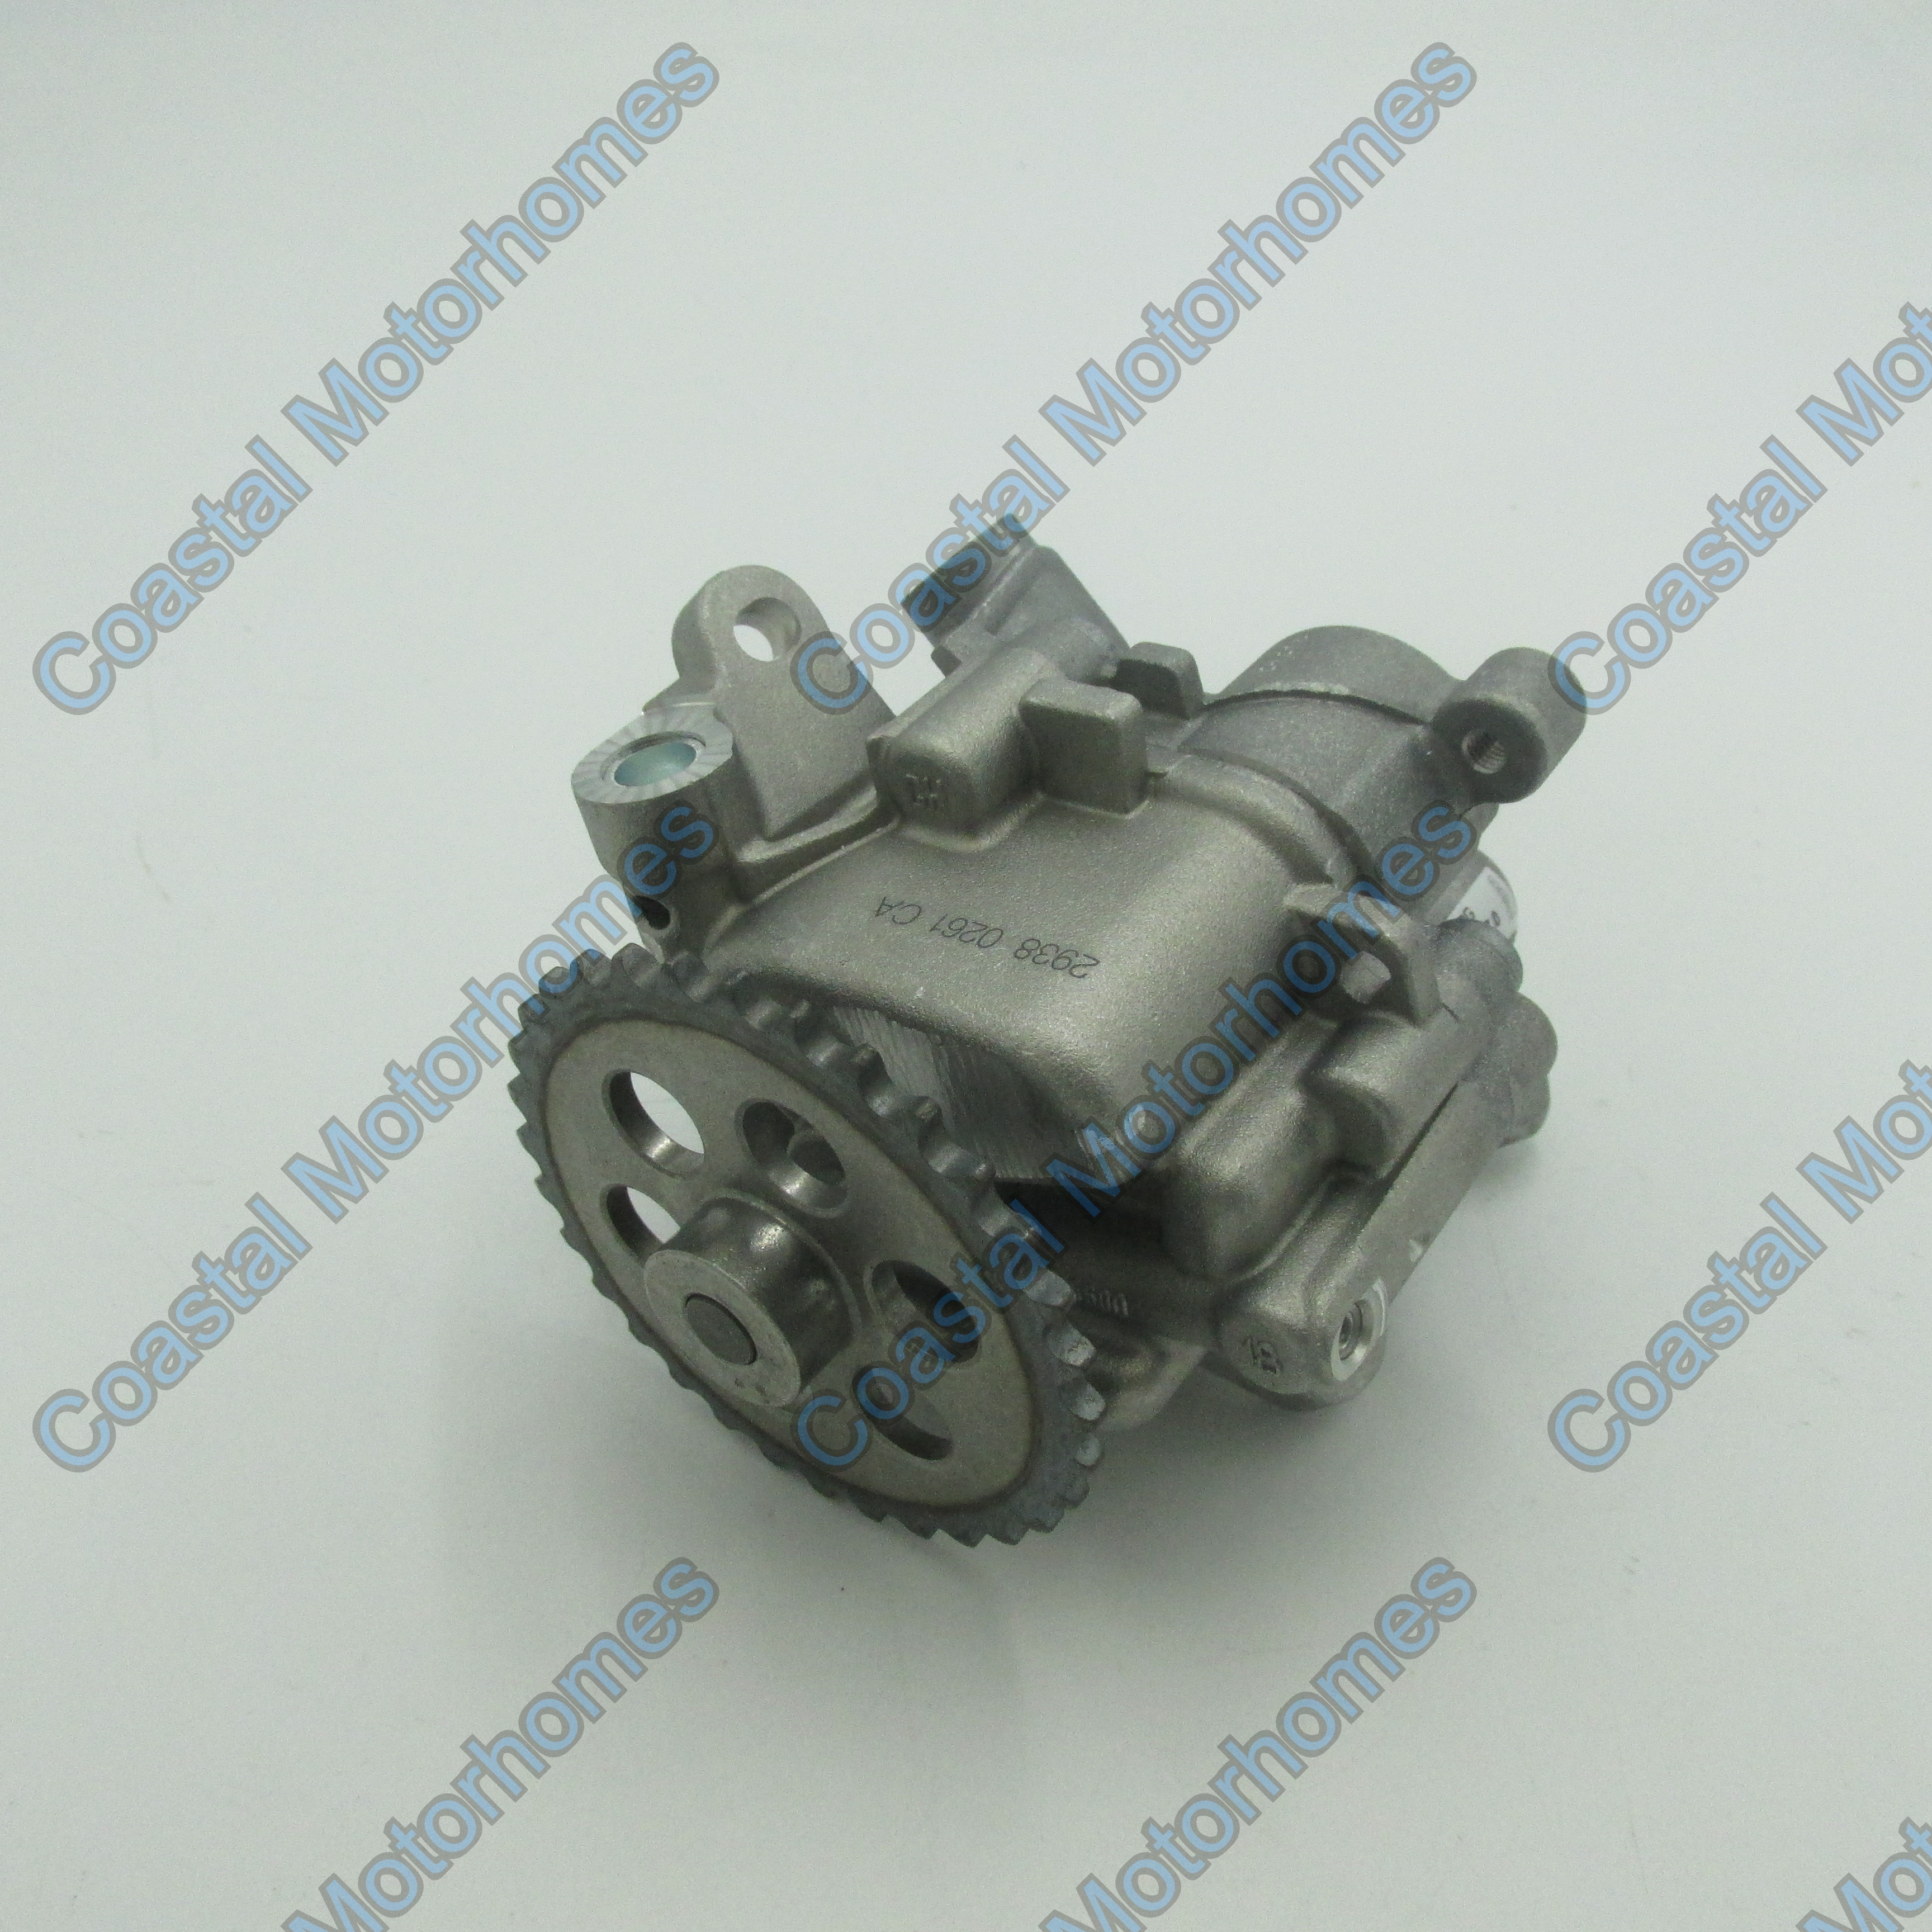 Transit Parts Transit MK7 MK8 Oil Pump Chain And Tensioner Relay Boxer 2.2 2.4 FWD Rwd 